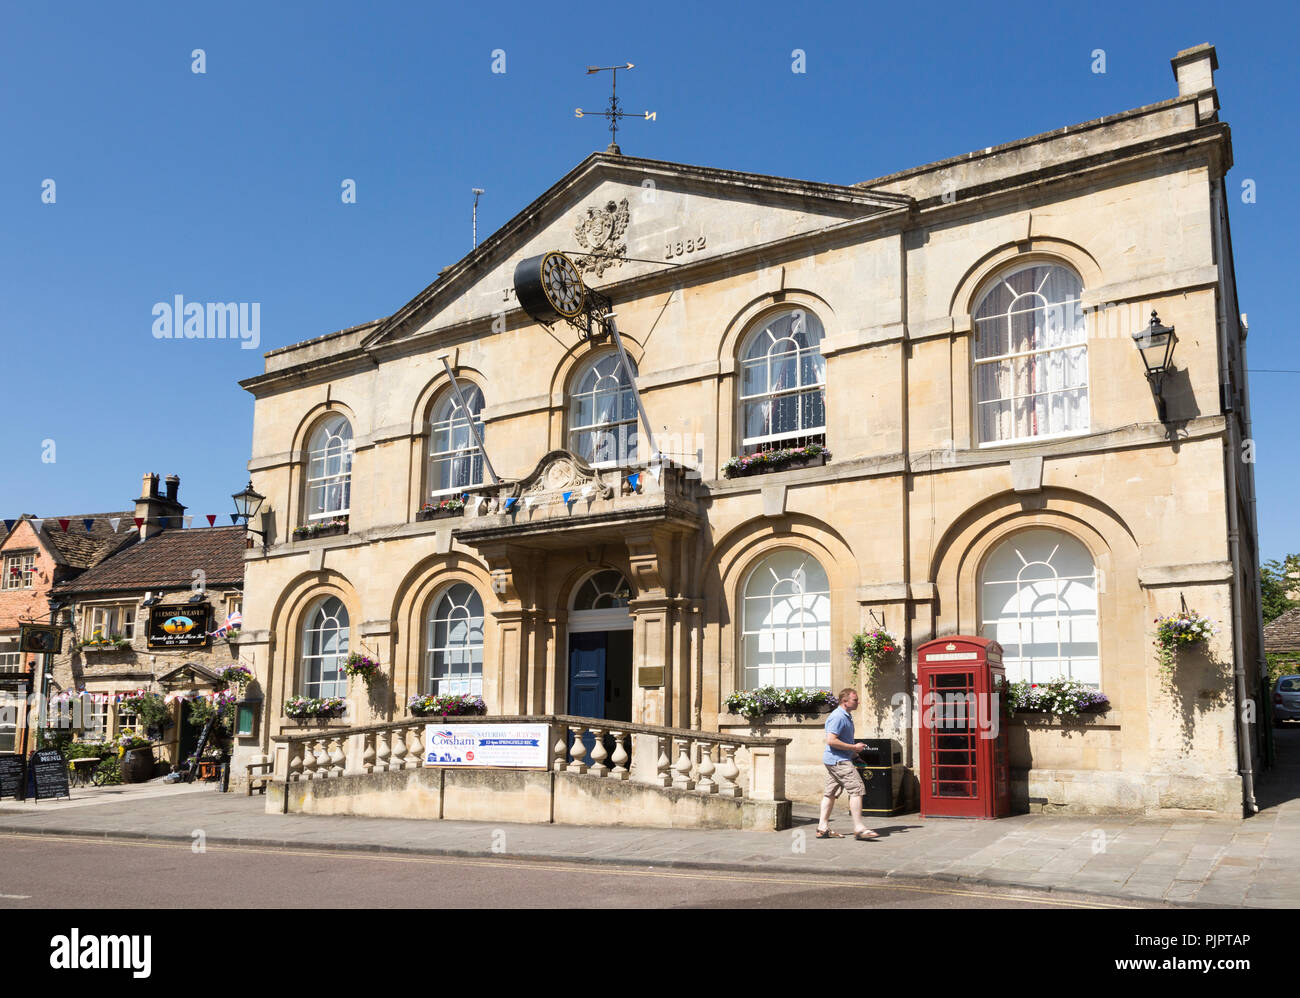 Georgian architecture of Town Hall building, Corsham, Wiltshire, England, UK dating from 1784 Stock Photo